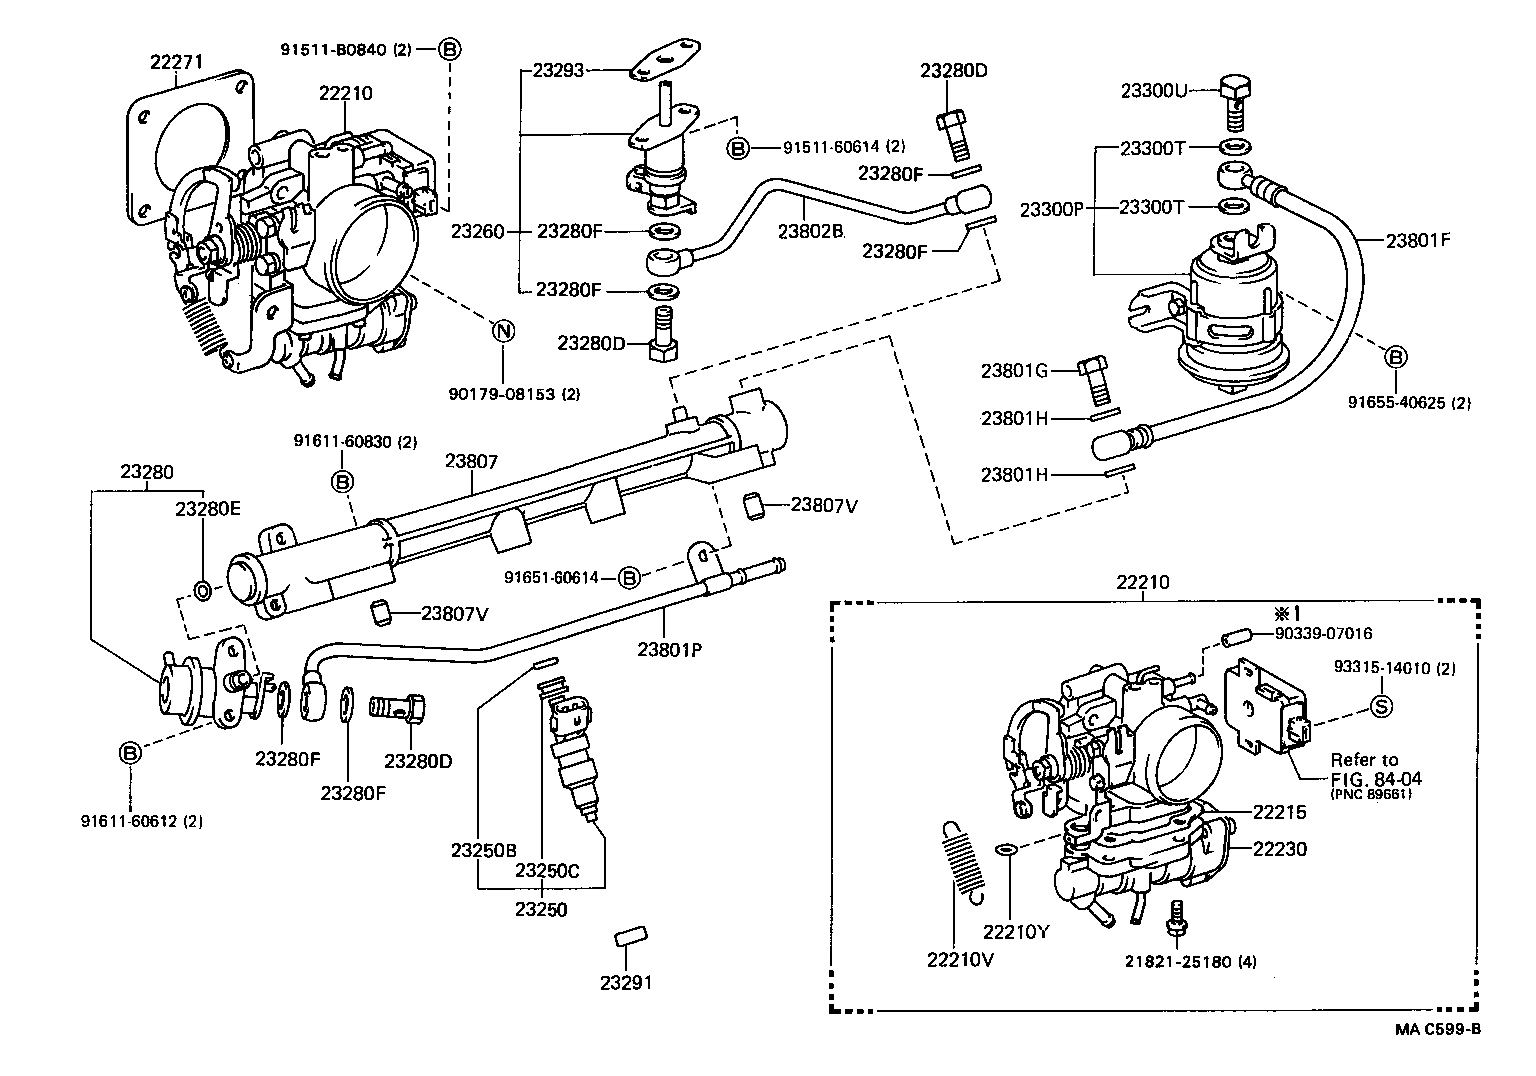  COROLLA HB |  FUEL INJECTION SYSTEM